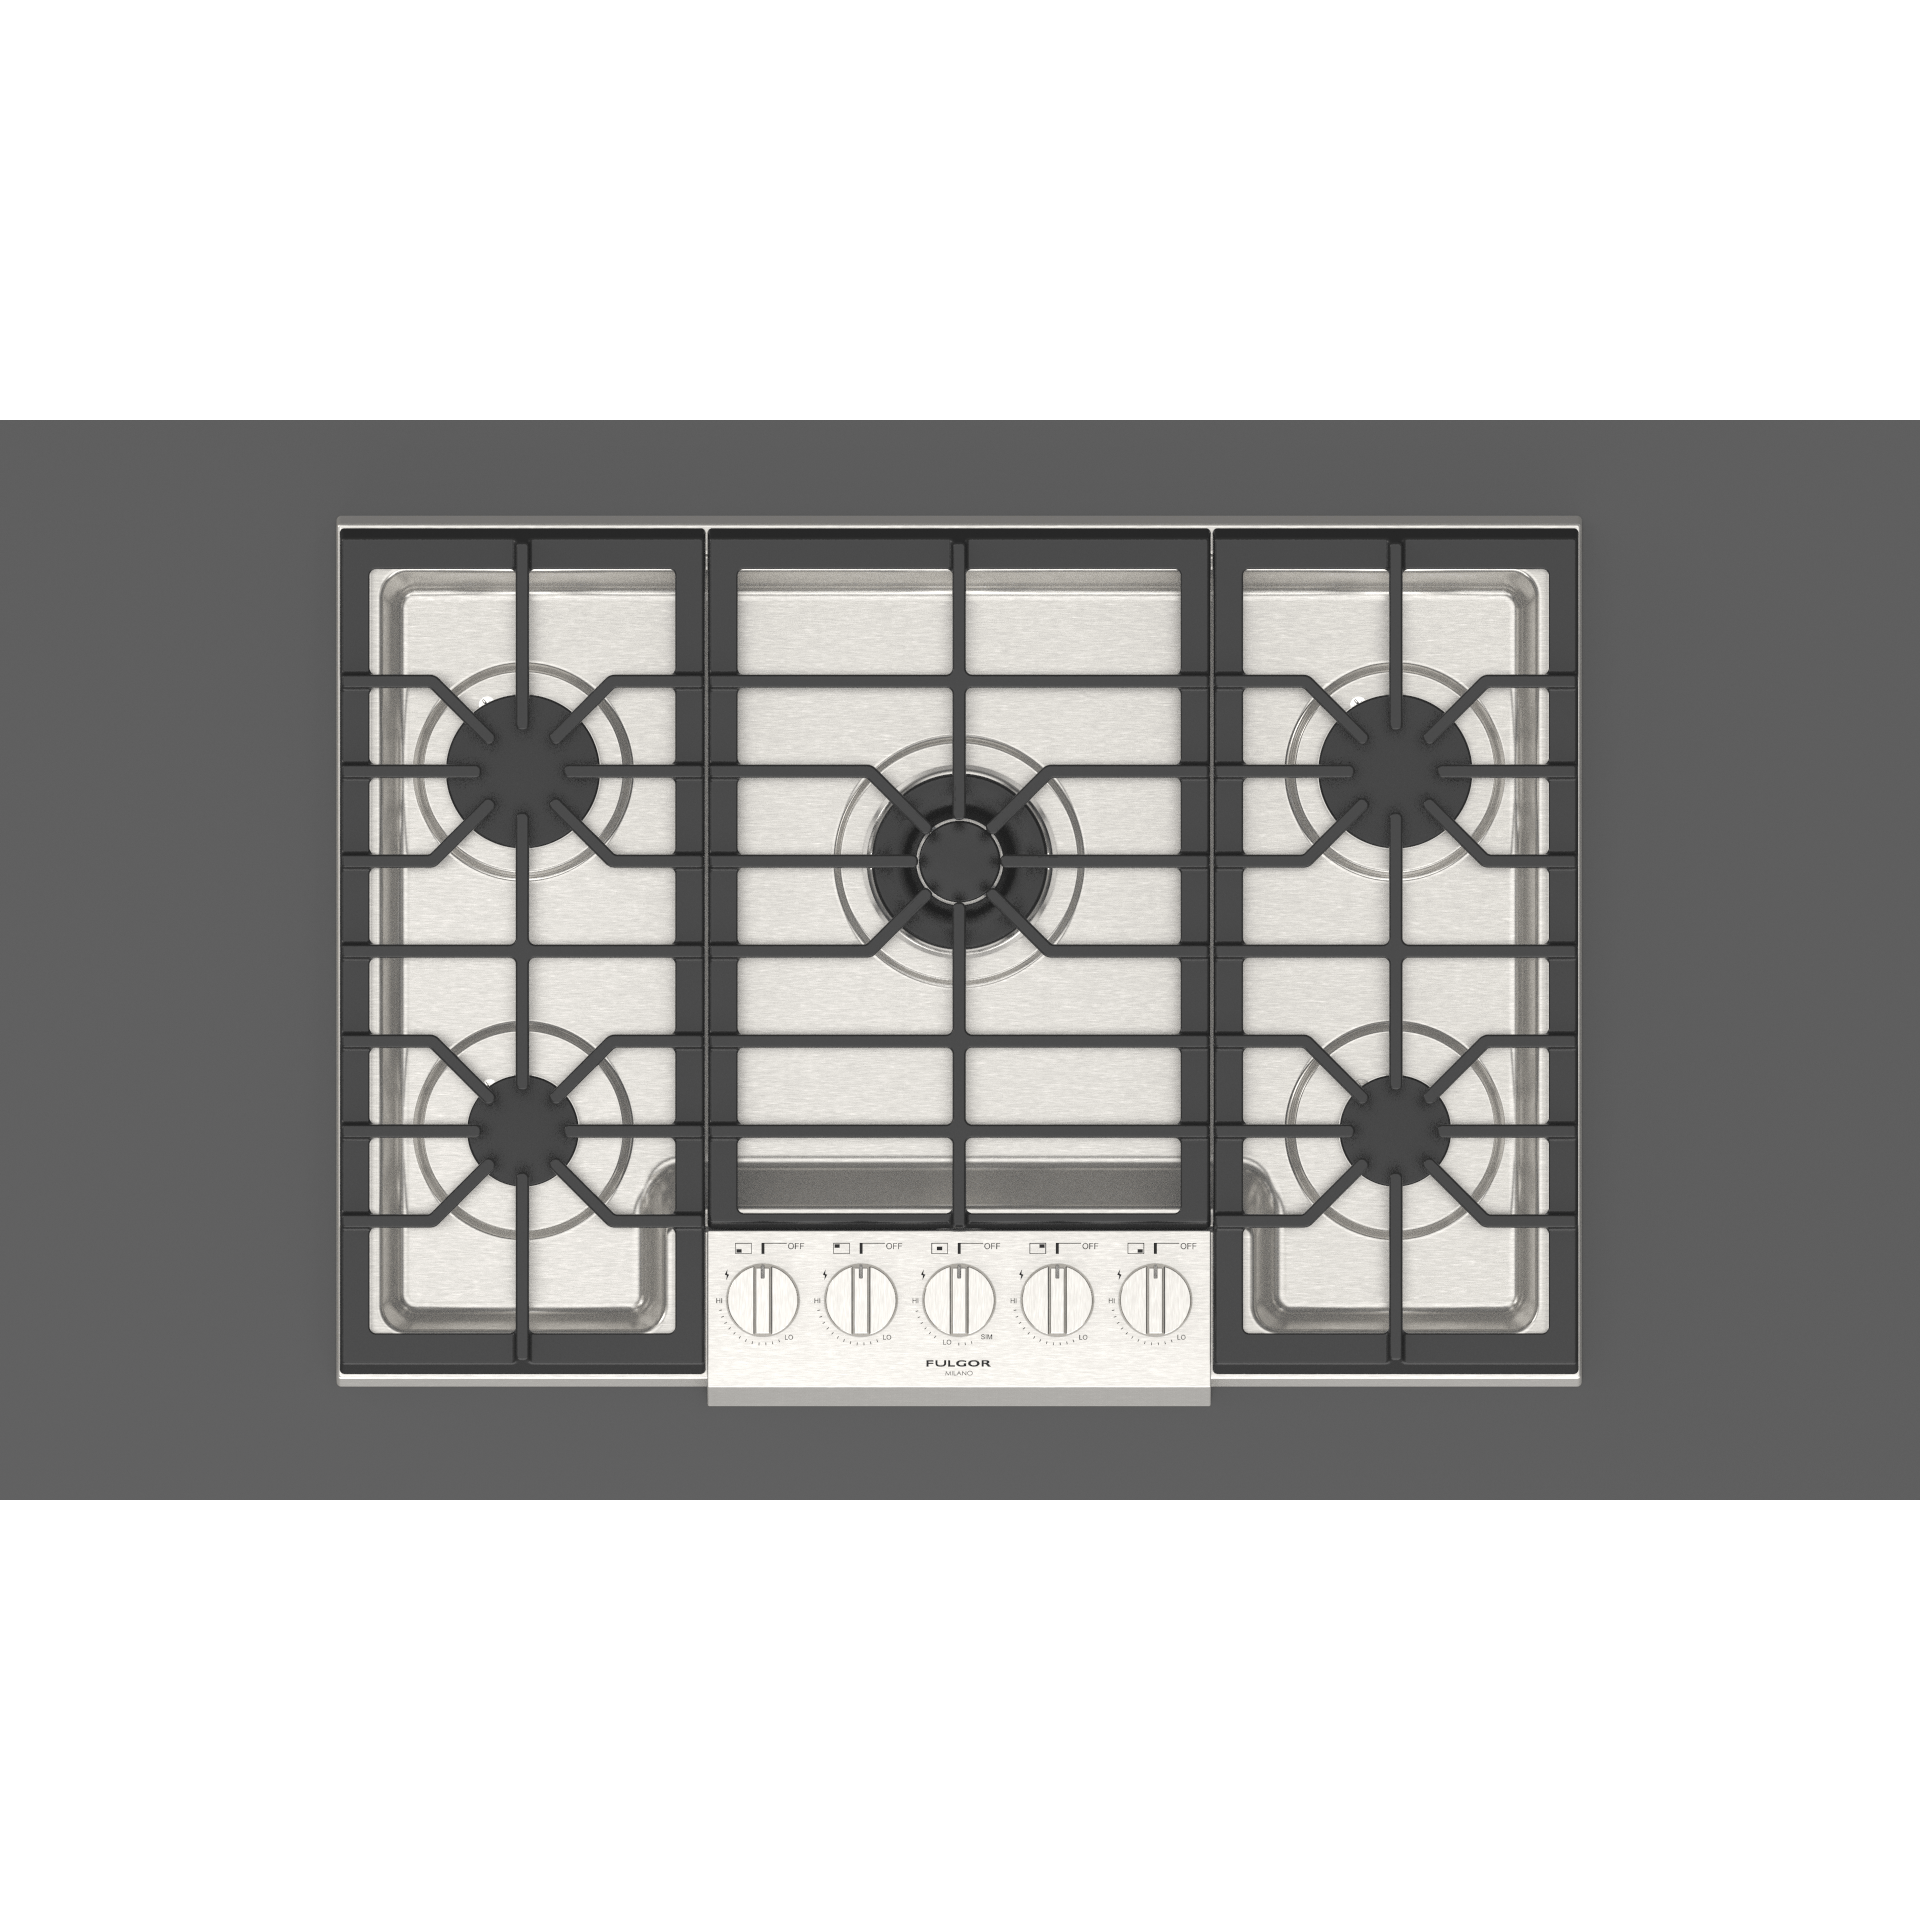 Fulgor Milano 30" Pro-Style Natural Gas Cooktop with 1 Central Dual Burner - F4PGK305S1 Cooktops F4PGK305S1 Luxury Appliances Direct